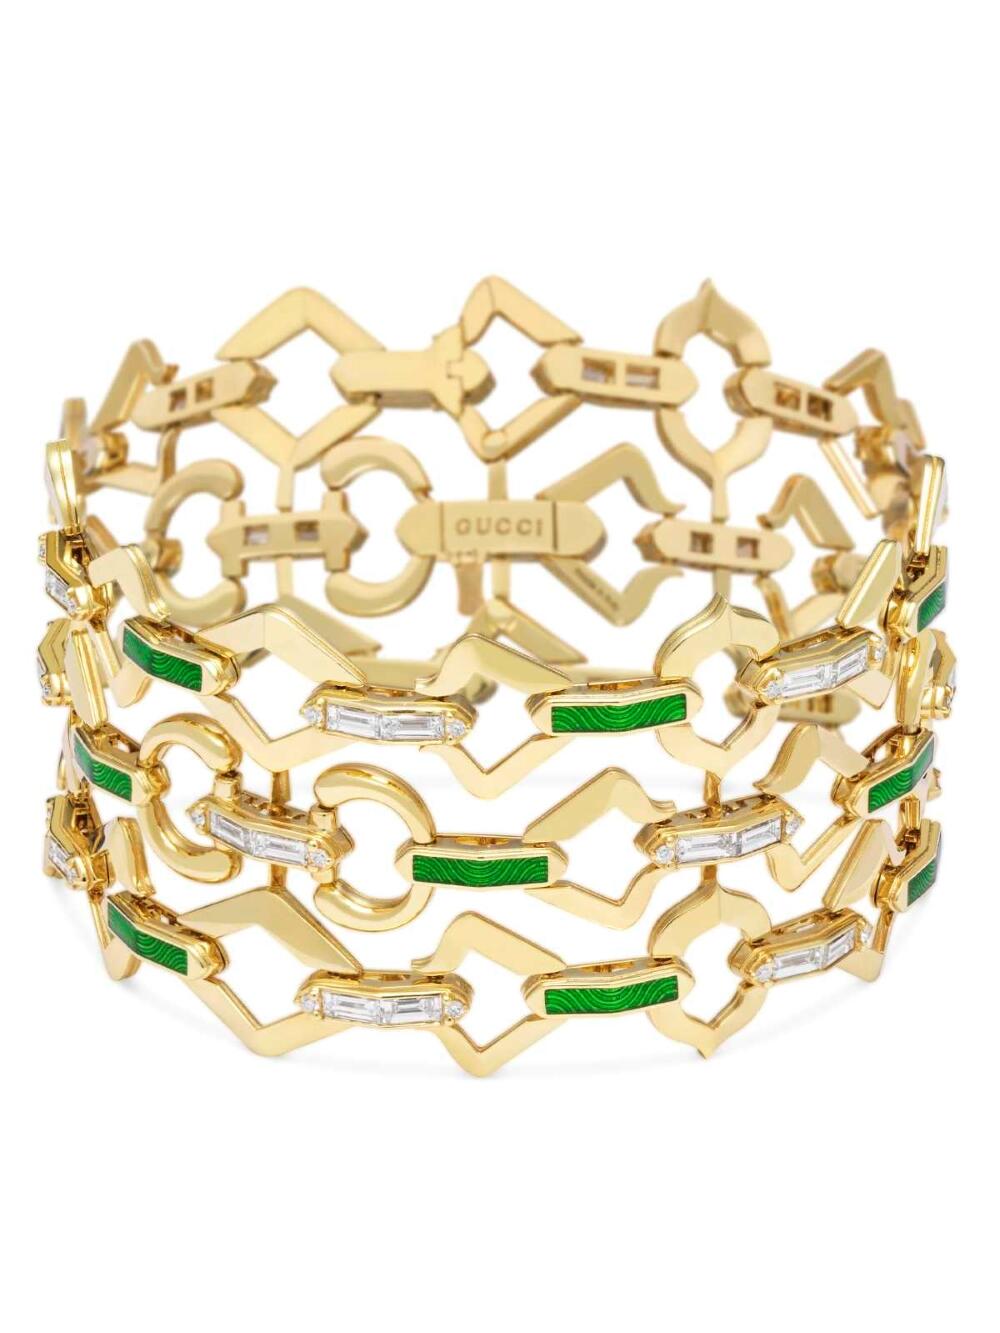 Gucci’s iconic Horsebit motif inspires striking new jewelry and watches